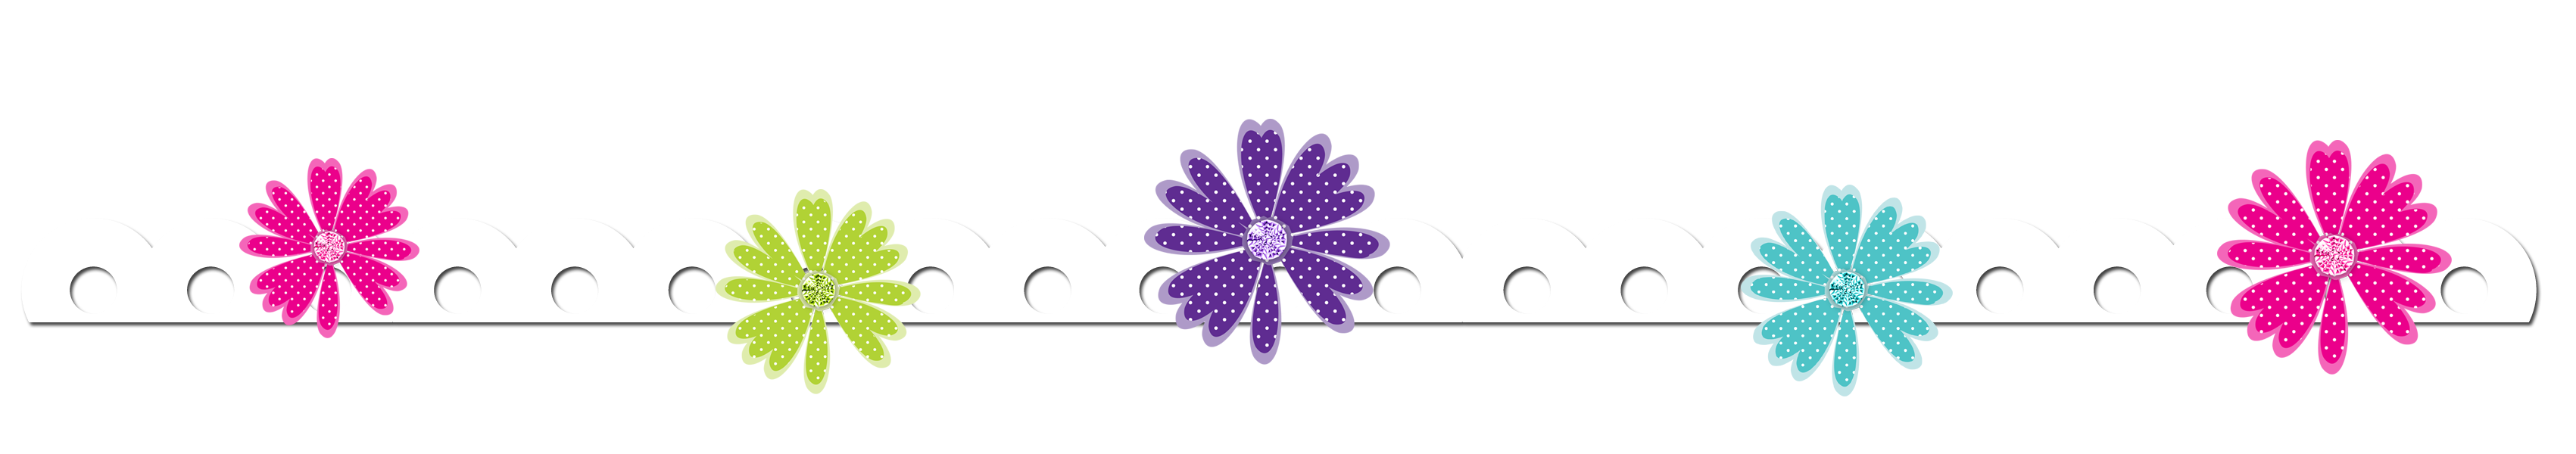 clipart flower page borders - photo #20